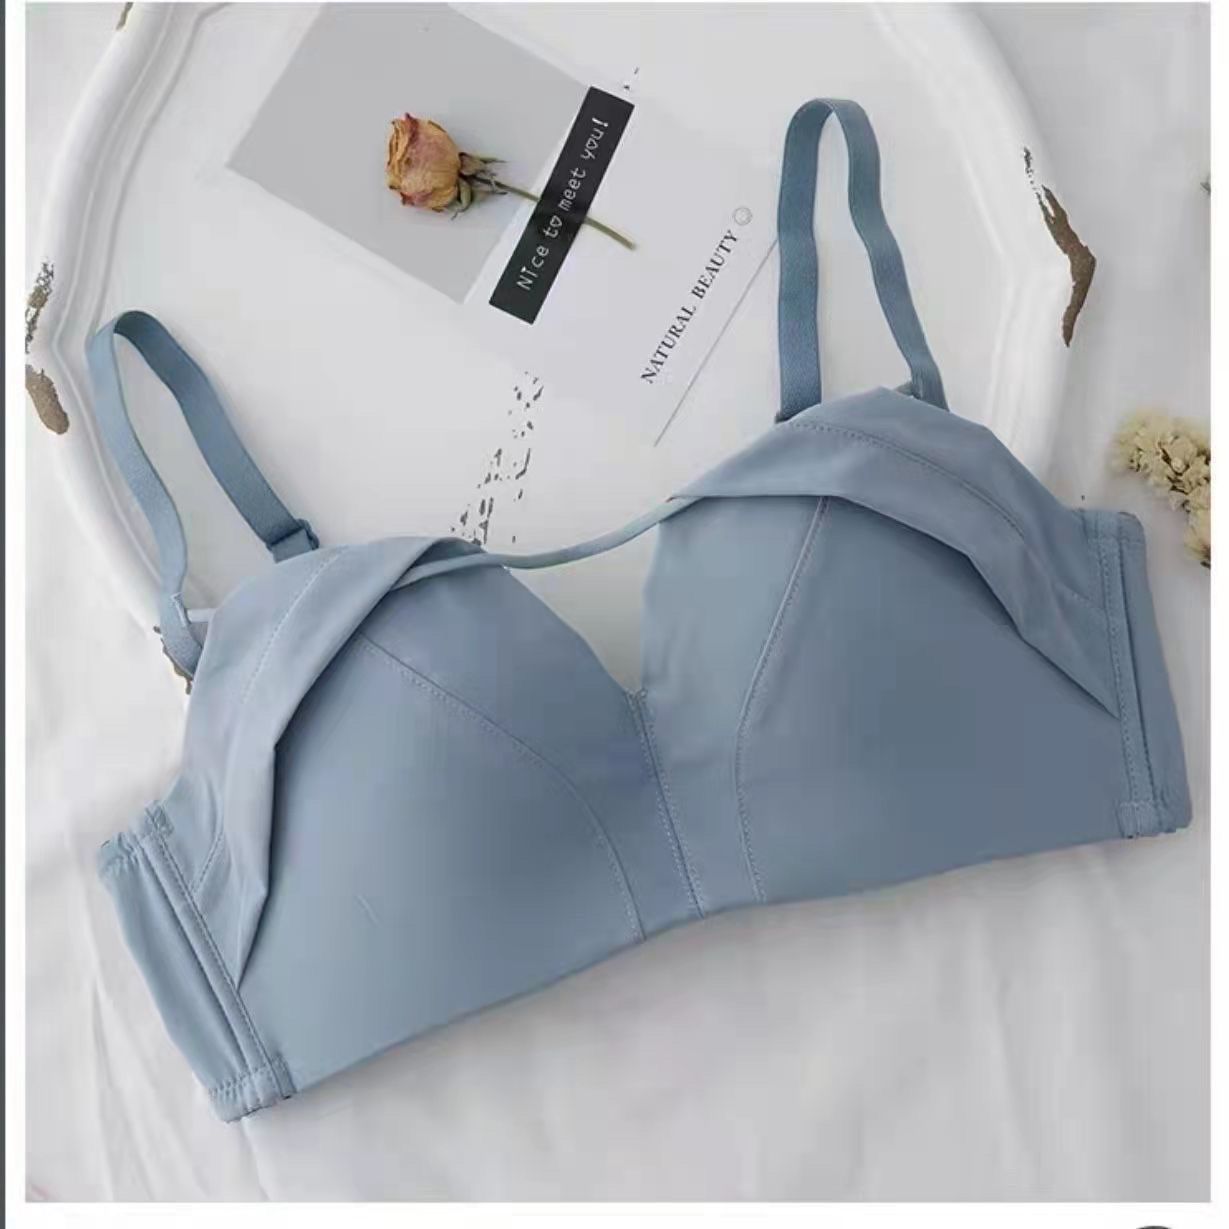 The new style of underwear women's suits without steel rings small chest gather girls adjustable bra pure thin section seamless underwear